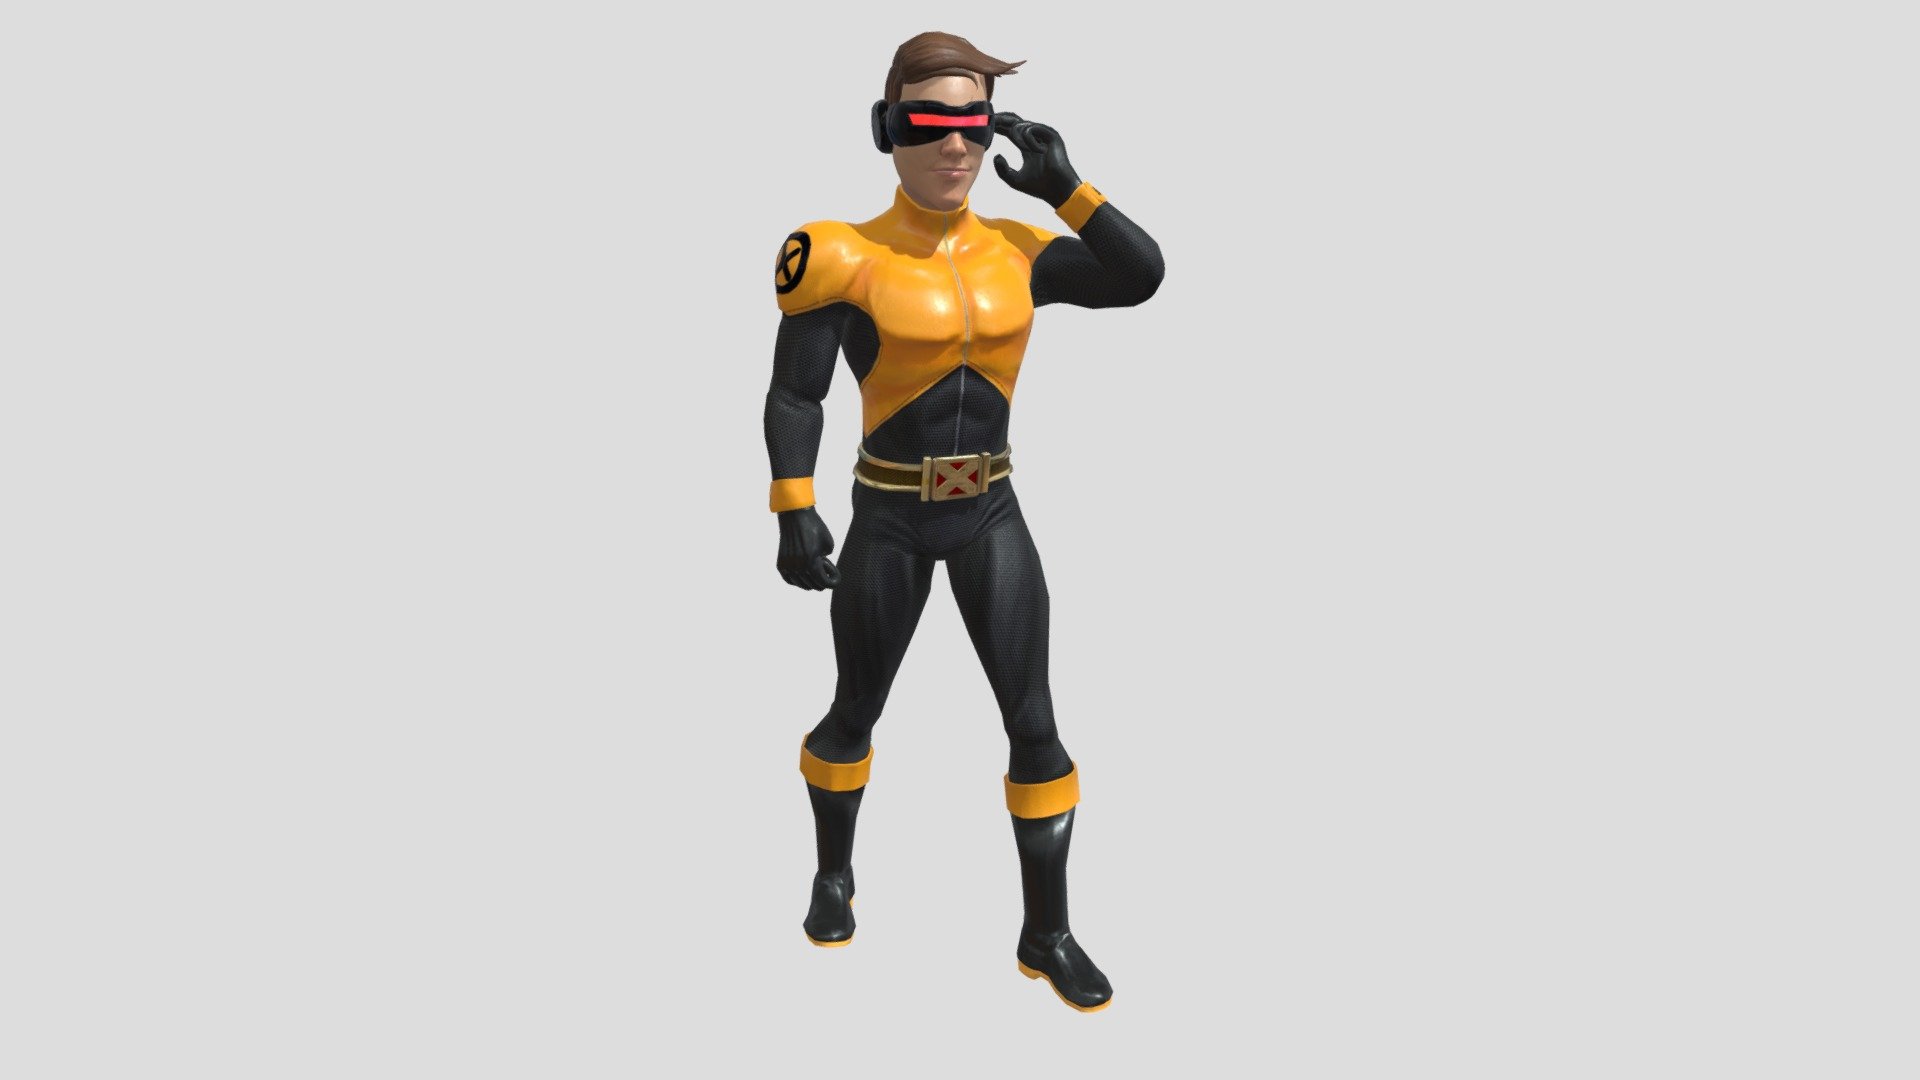 Cyclops from my &ldquo;X-Men: The New Animated Series